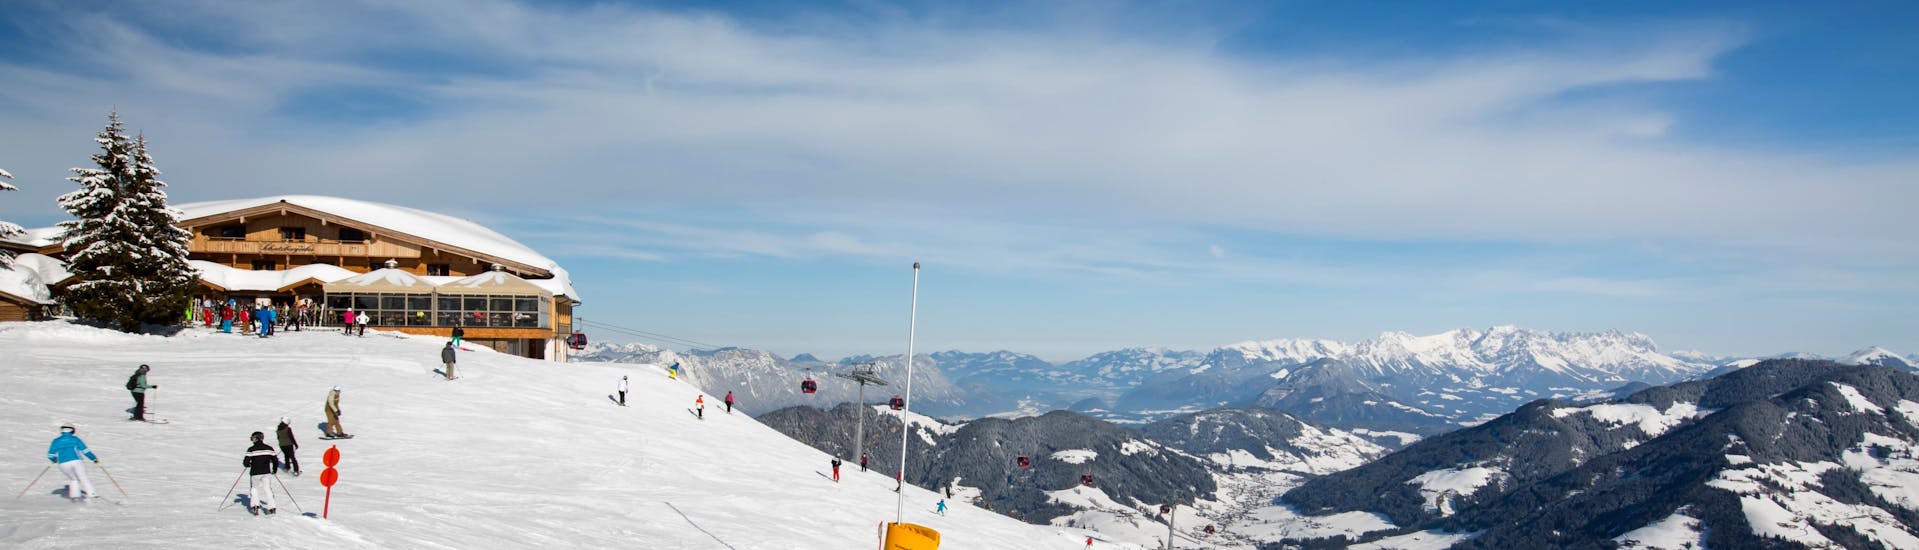 View over the sunny mountain landscape while learning to ski with the ski schools in Wildschönau.